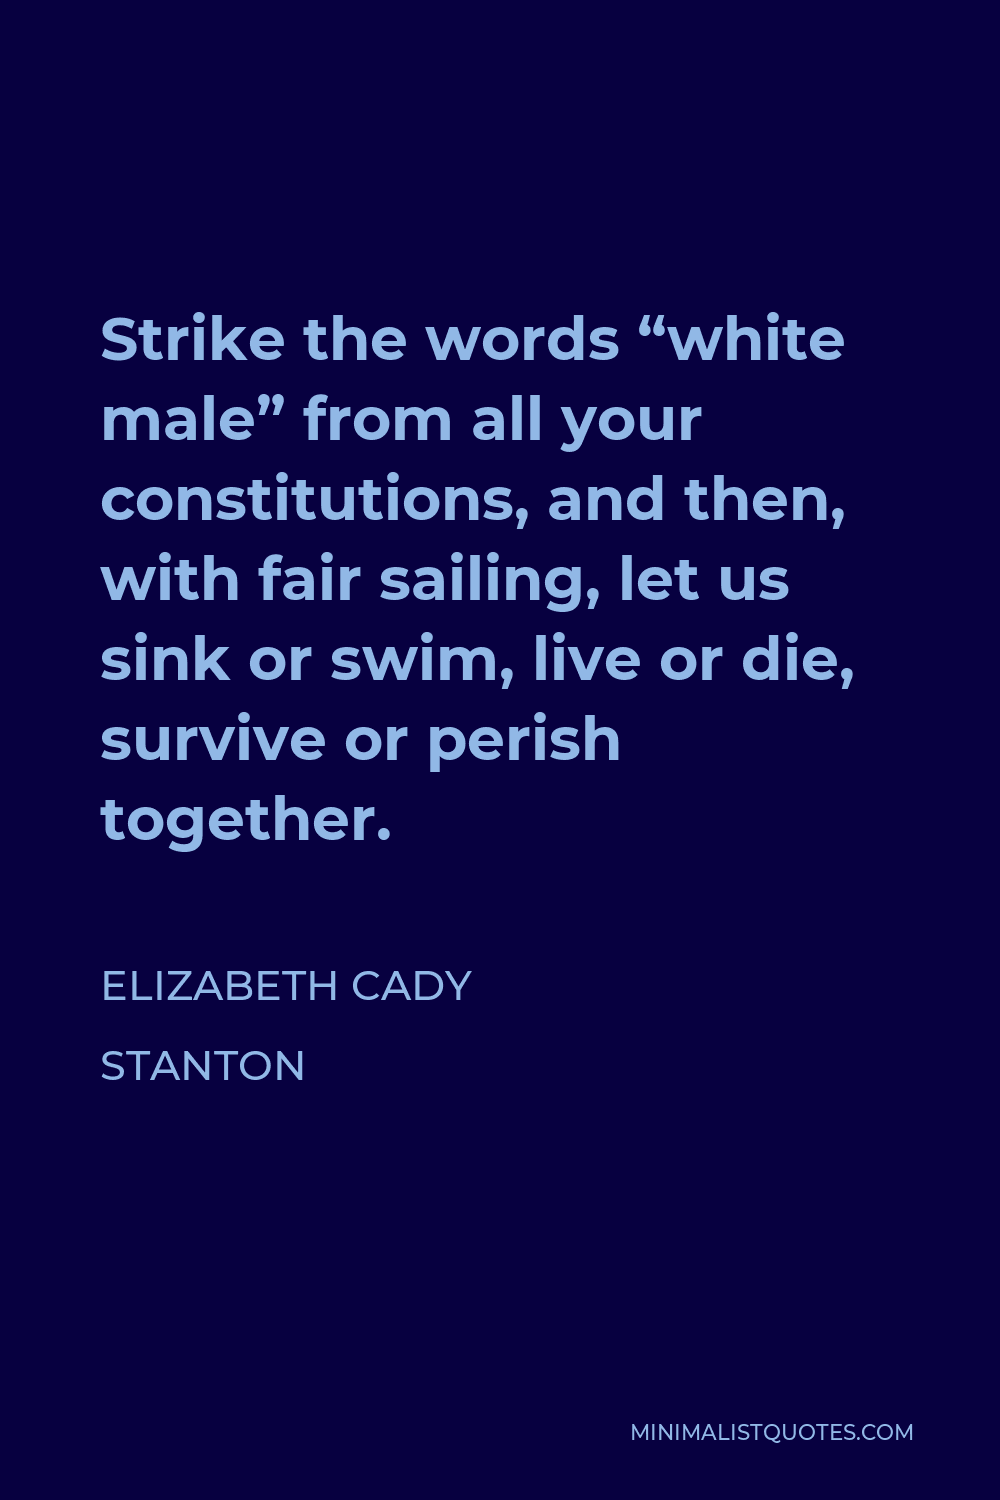 Elizabeth Cady Stanton Quote - Strike the words “white male” from all your constitutions, and then, with fair sailing, let us sink or swim, live or die, survive or perish together.